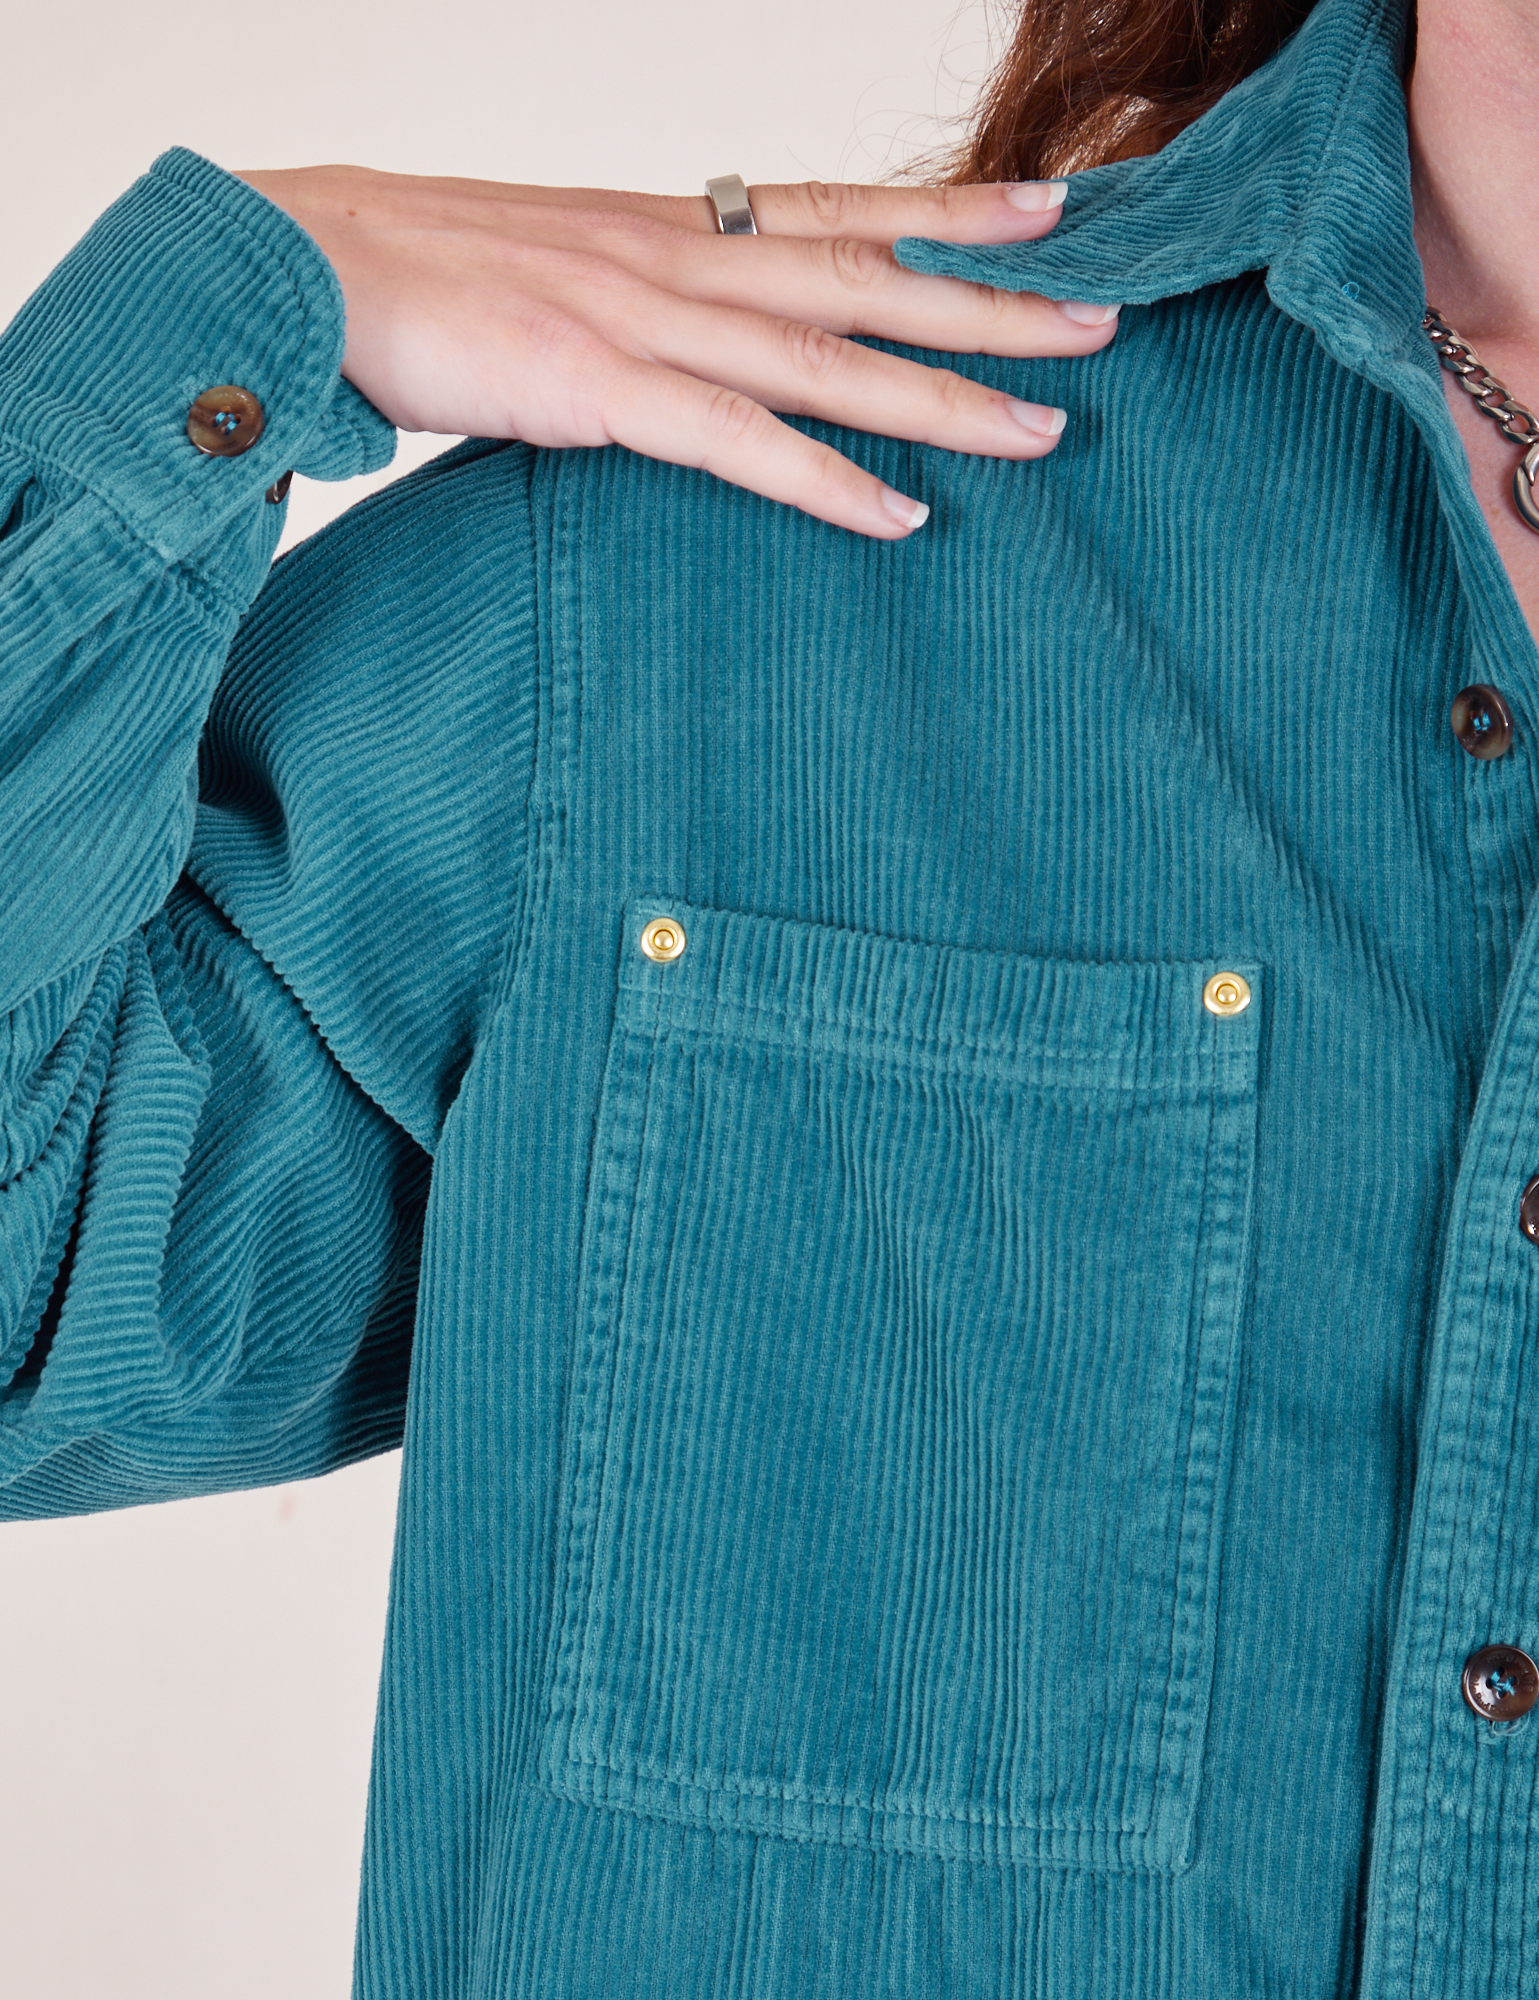 Front pocket close up of Corduroy Overshirt in Marine Blue on Alex